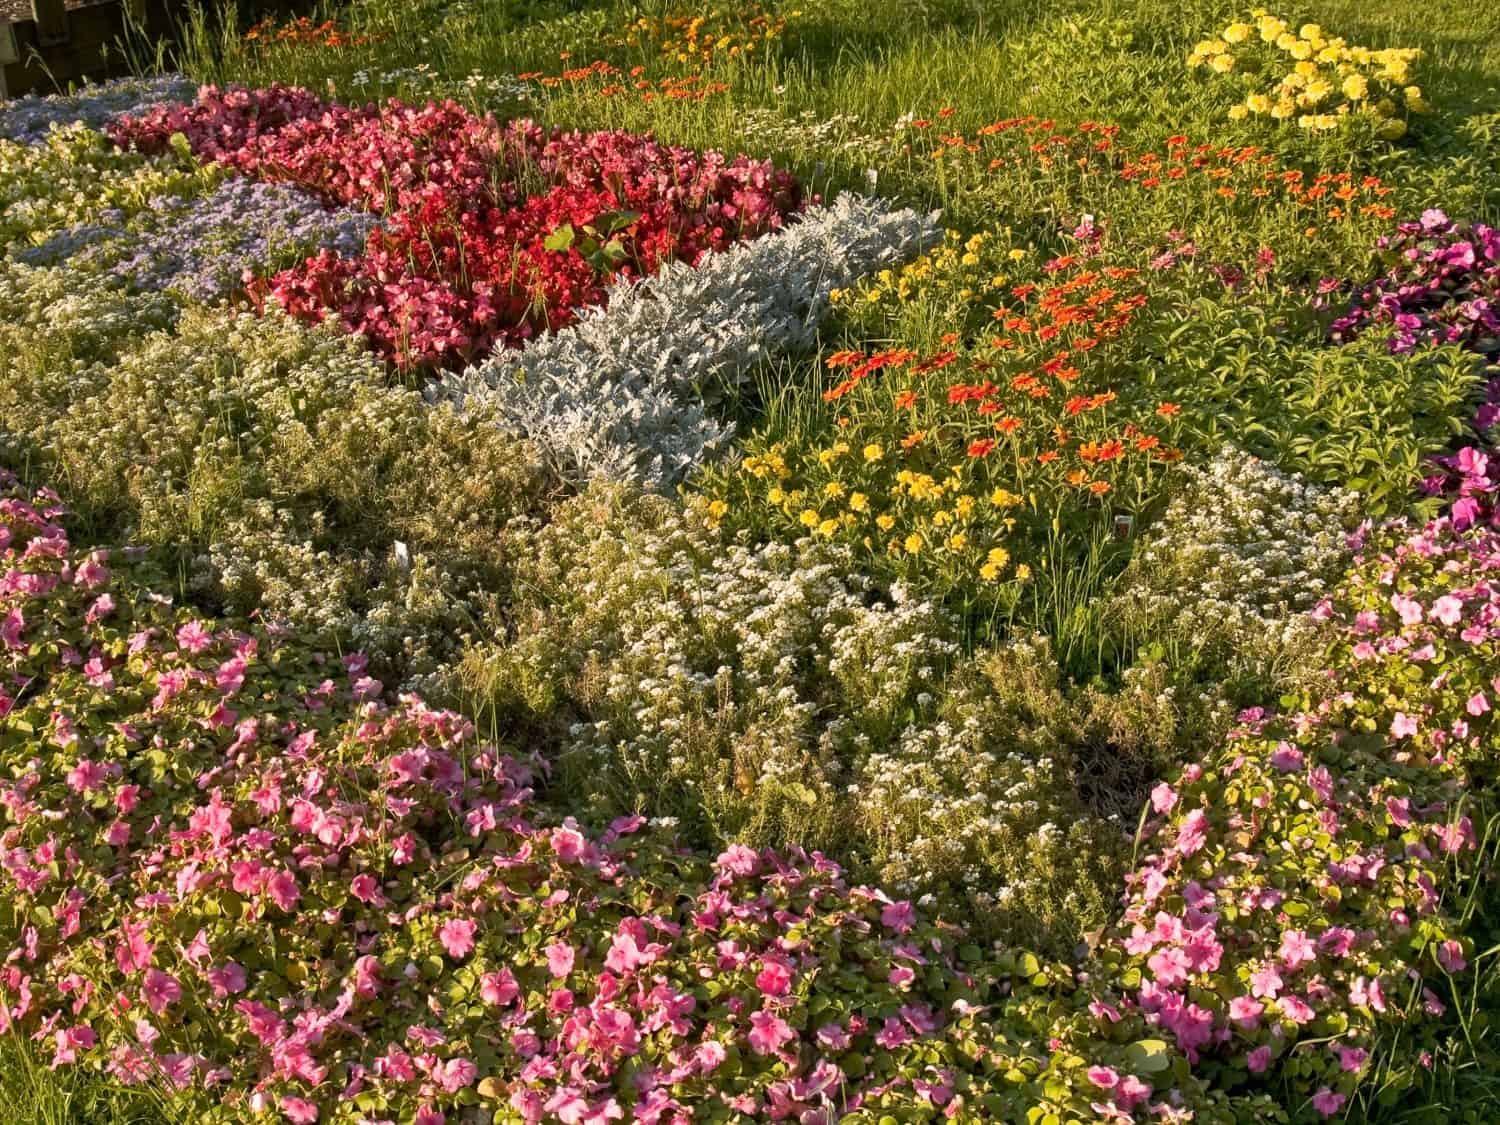 A colorful flower bed is part of Deep Cut Gardens, a Monmouth County, New Jersey park.